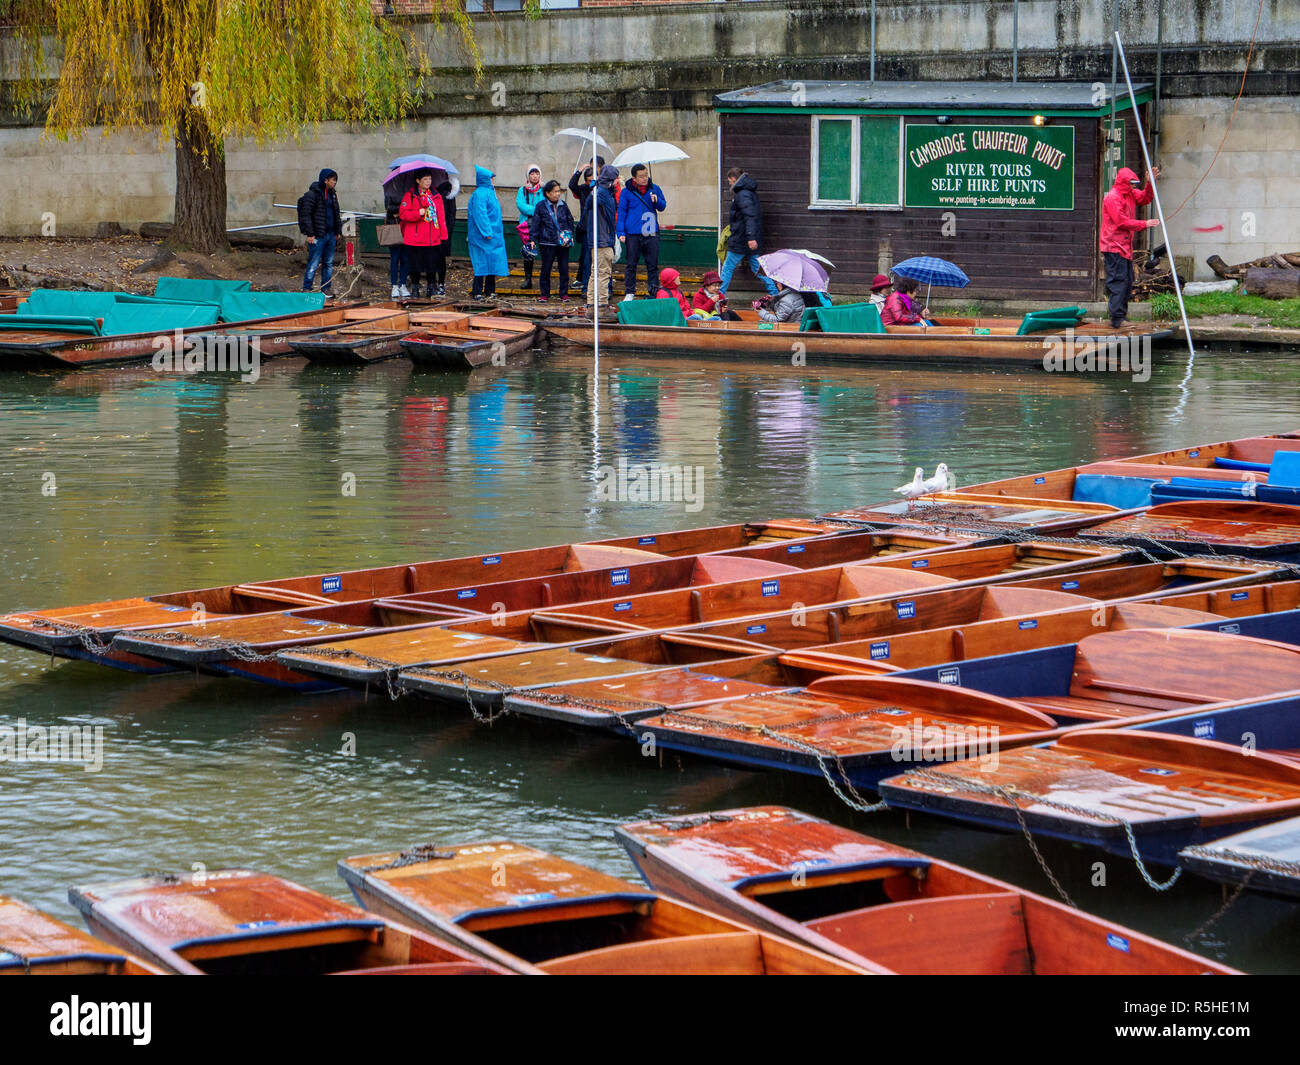 Cambridge Tourism Winter - Asian tourists queue in the rain to take chauffeured punts on the River Cam in central Cambridge UK Stock Photo